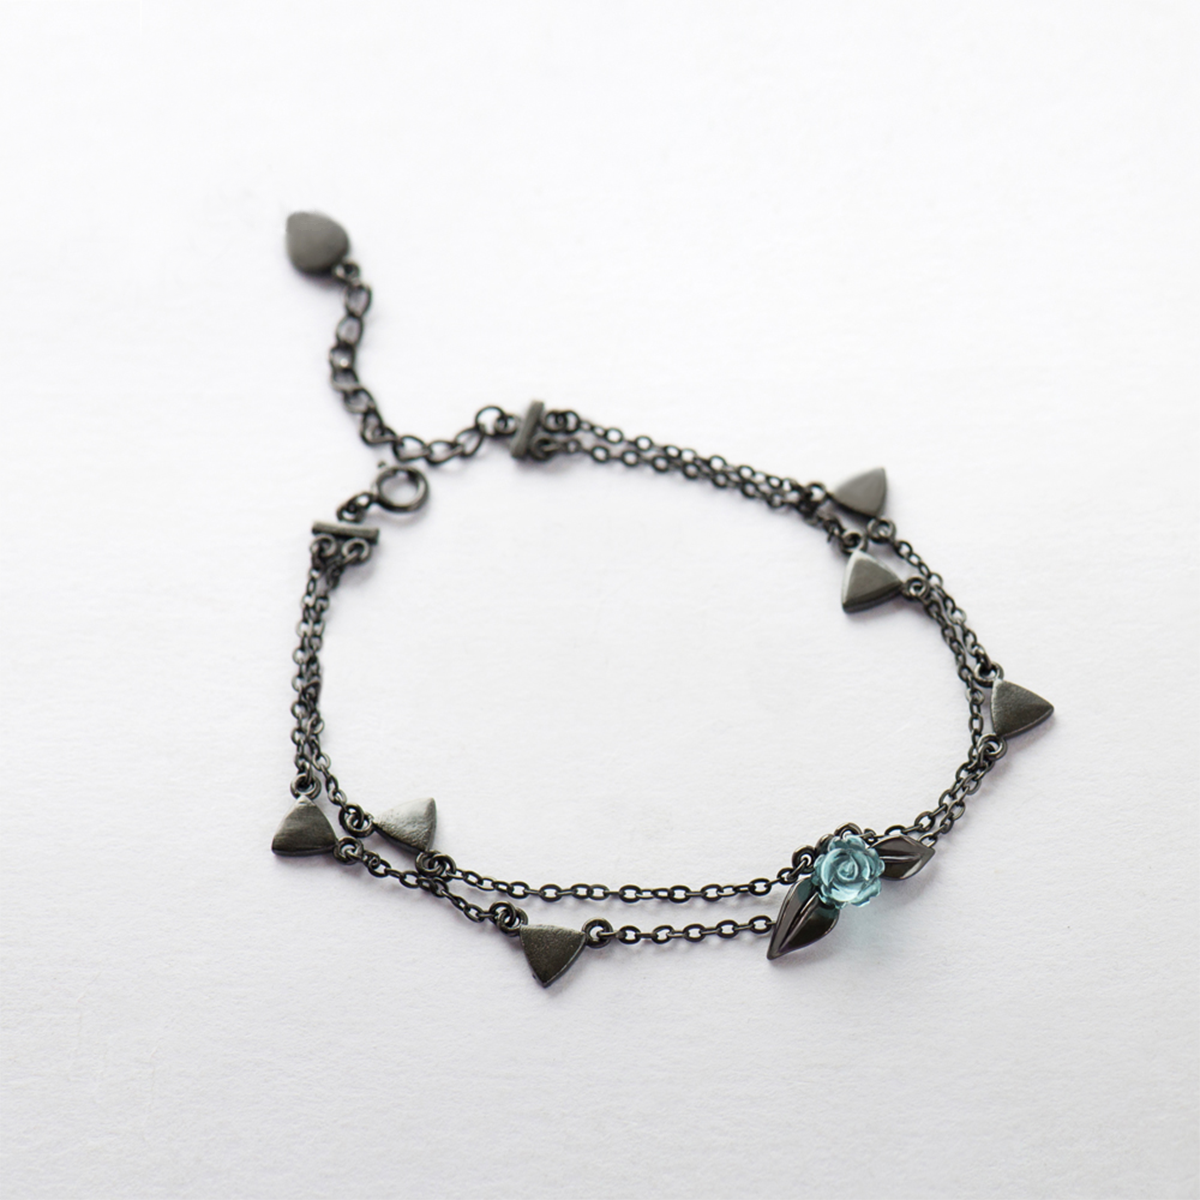 Thorns and Roses Bracelet - Misty and Molly